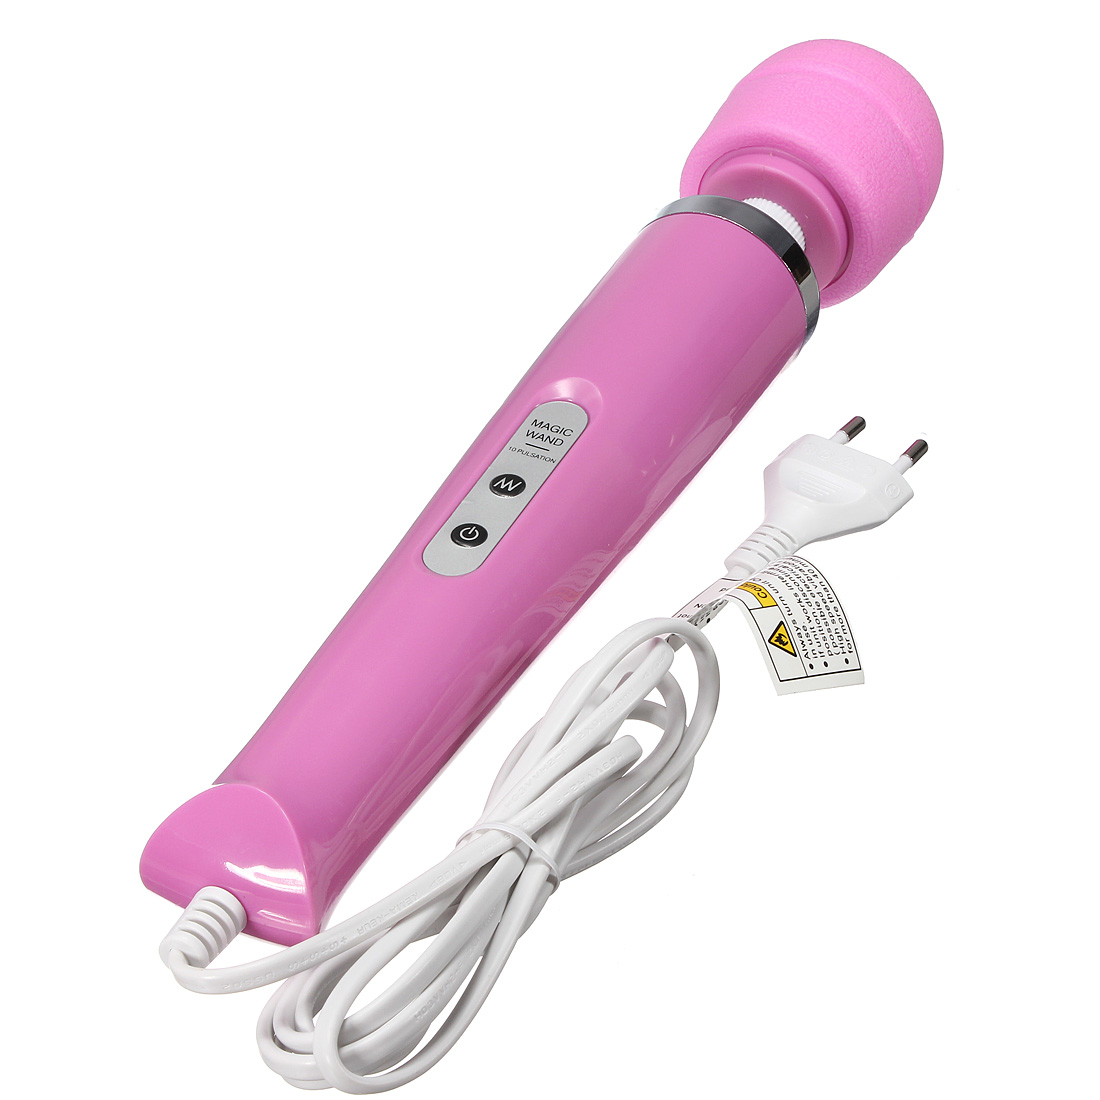 10 Speed Electric Magic Wand Personal Wired Relax Vibrate Full Body